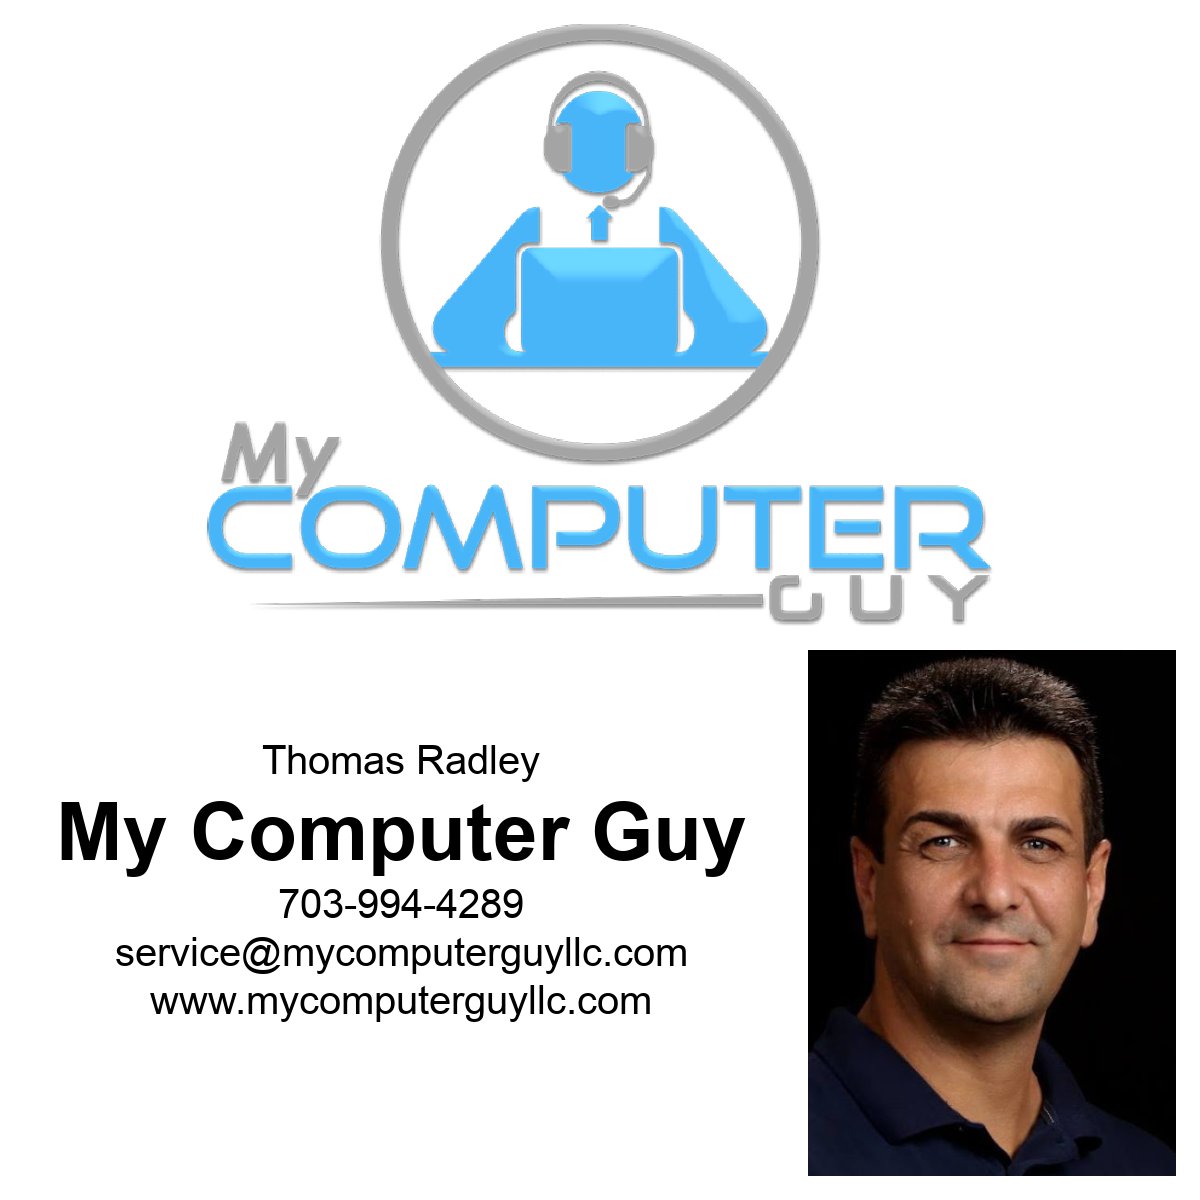 WE’VE GOT YOU COVERED
We know how intimidating your computer can be, so let My Computer Guy help. 
Thomas Radley
My Computer Guy
703-994-4289 (O)
service@mycomputerguyllc.com
mycomputerguyllc.com
#computerhelp #networking